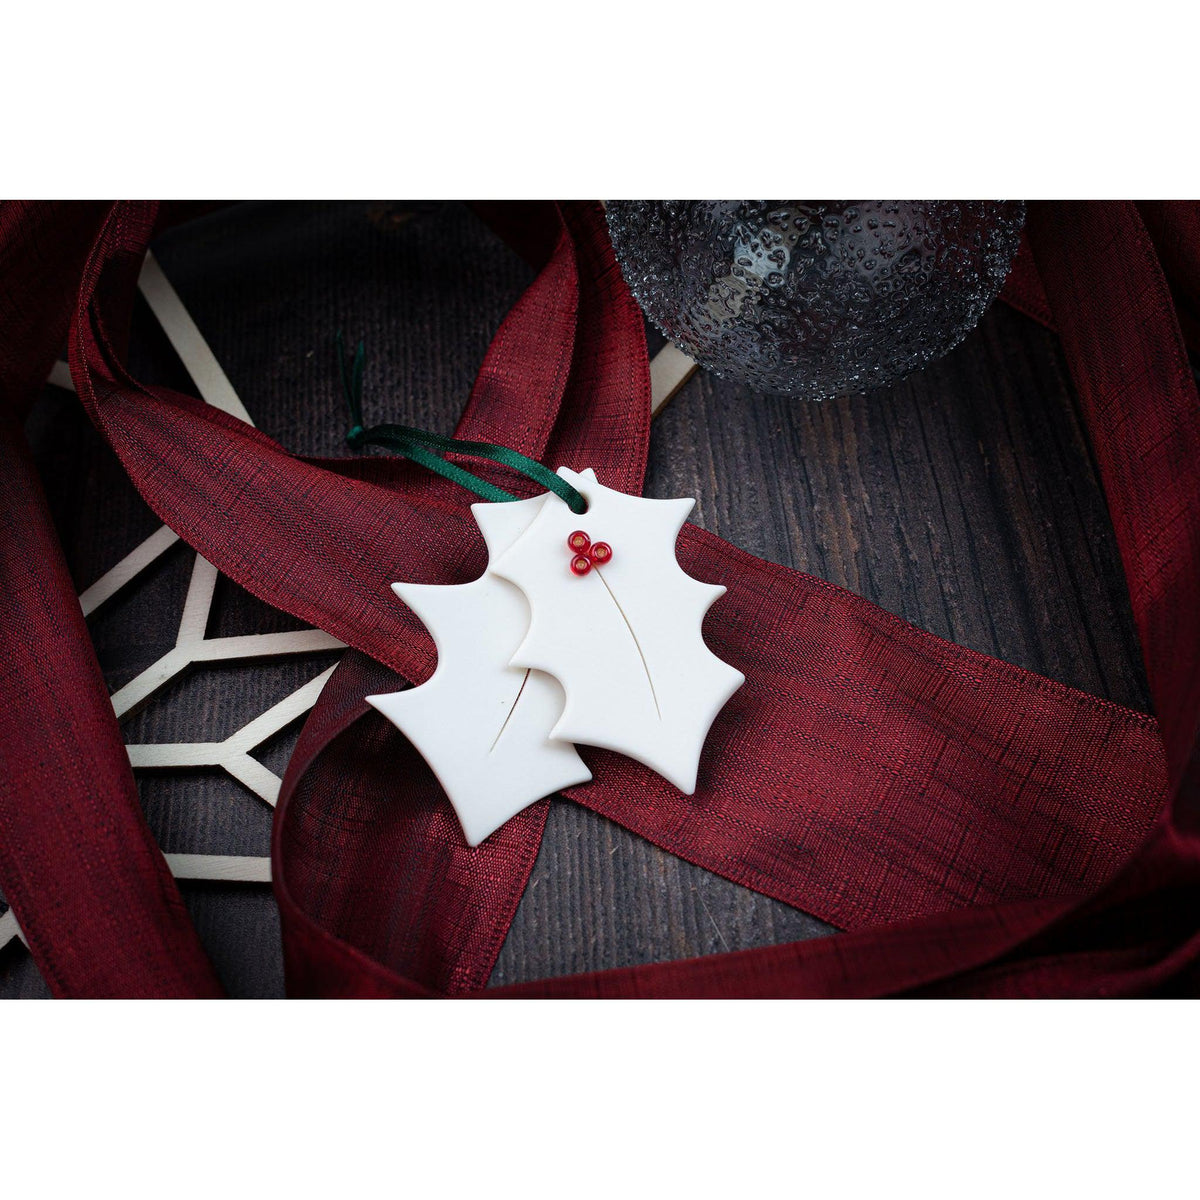 Holly decoration by Rhian Winslade, available at Padstow Gallery, Cornwall